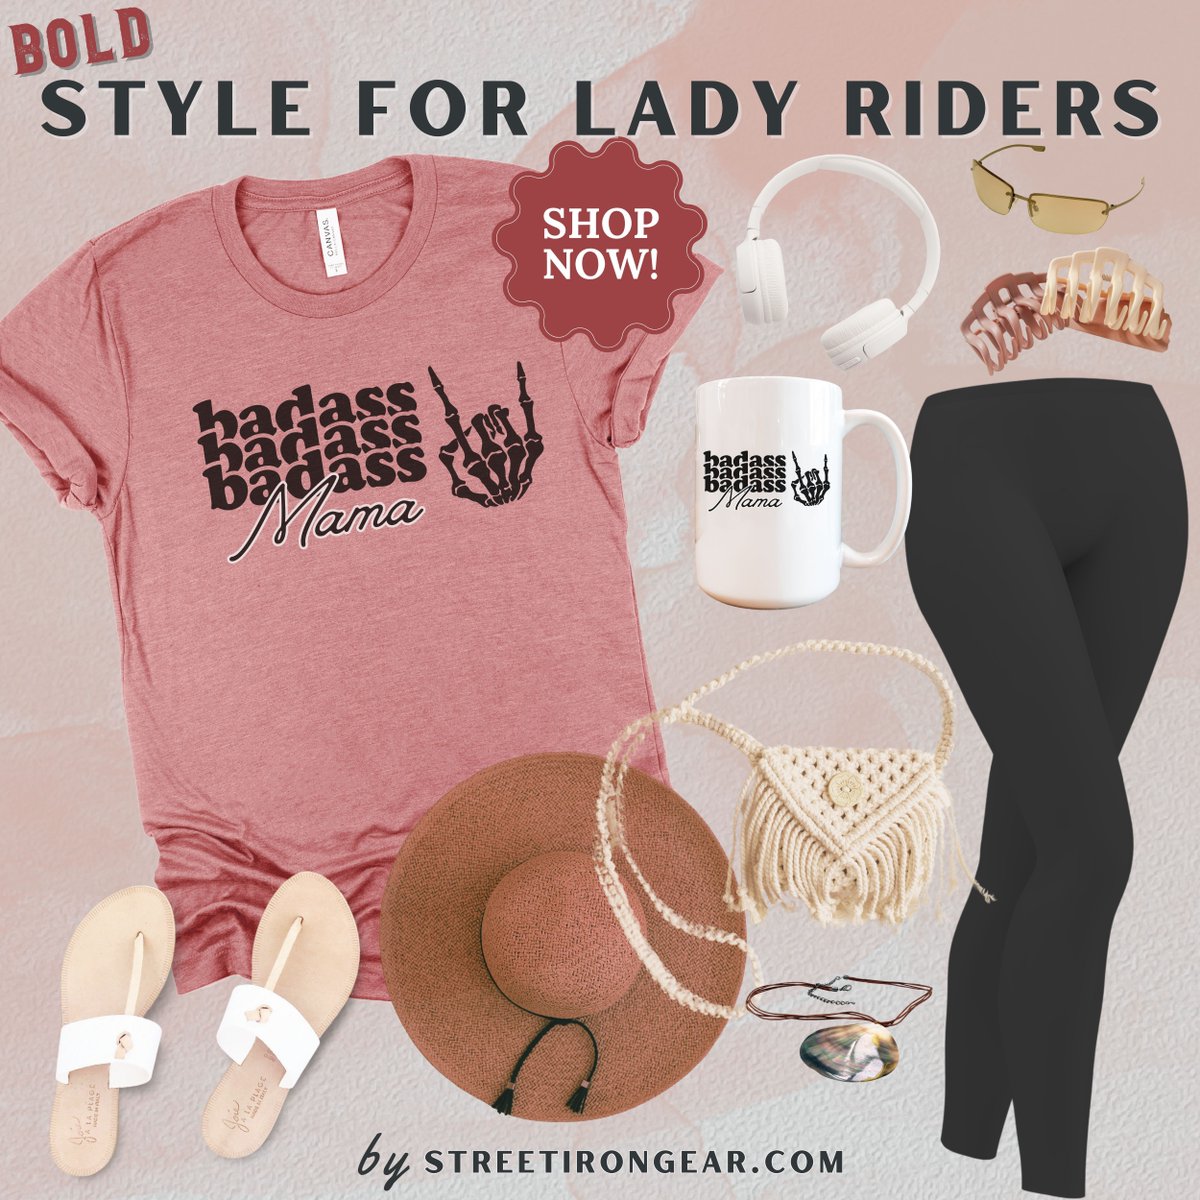 Happy Mother's Day Lady Riders!
For all the fierce moms out there, this one's for you. Snag yours at StreetIronGear.com! 🌸

#StreetIronGear #BadassMama #MomLife #SkullStyle #BikerMama #TrendyMoms #HappyMothersDay #ShopForMom 

SHOP NOW!
buff.ly/3xNQOIK